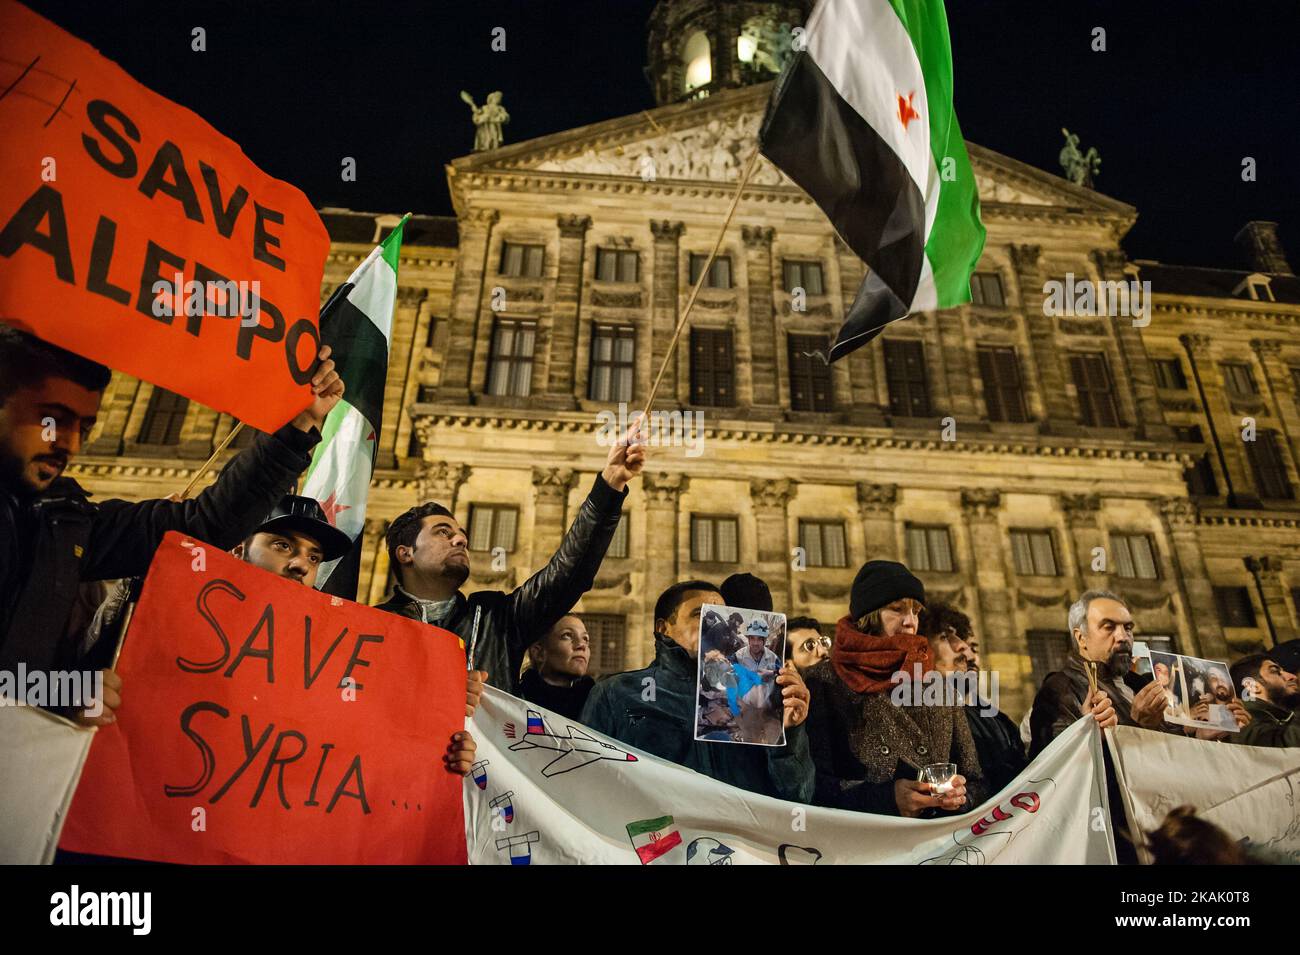 The recent news are reporting the dead of at least 82 civilians killed by Syrian soldiers and allied Shiite militias from Iraq and backed by Iran, according to U.N. reports. So, on the evening of December 14, people in The Netherlands has been called to show their support and solidarity with the people of Aleppo peacefully, in one of the most emblematics places in Amsterdam, The 'Dam Square' to light candles for the victims. (Photo by Romy Arroyo Fernandez/NurPhoto) *** Please Use Credit from Credit Field *** Stock Photo